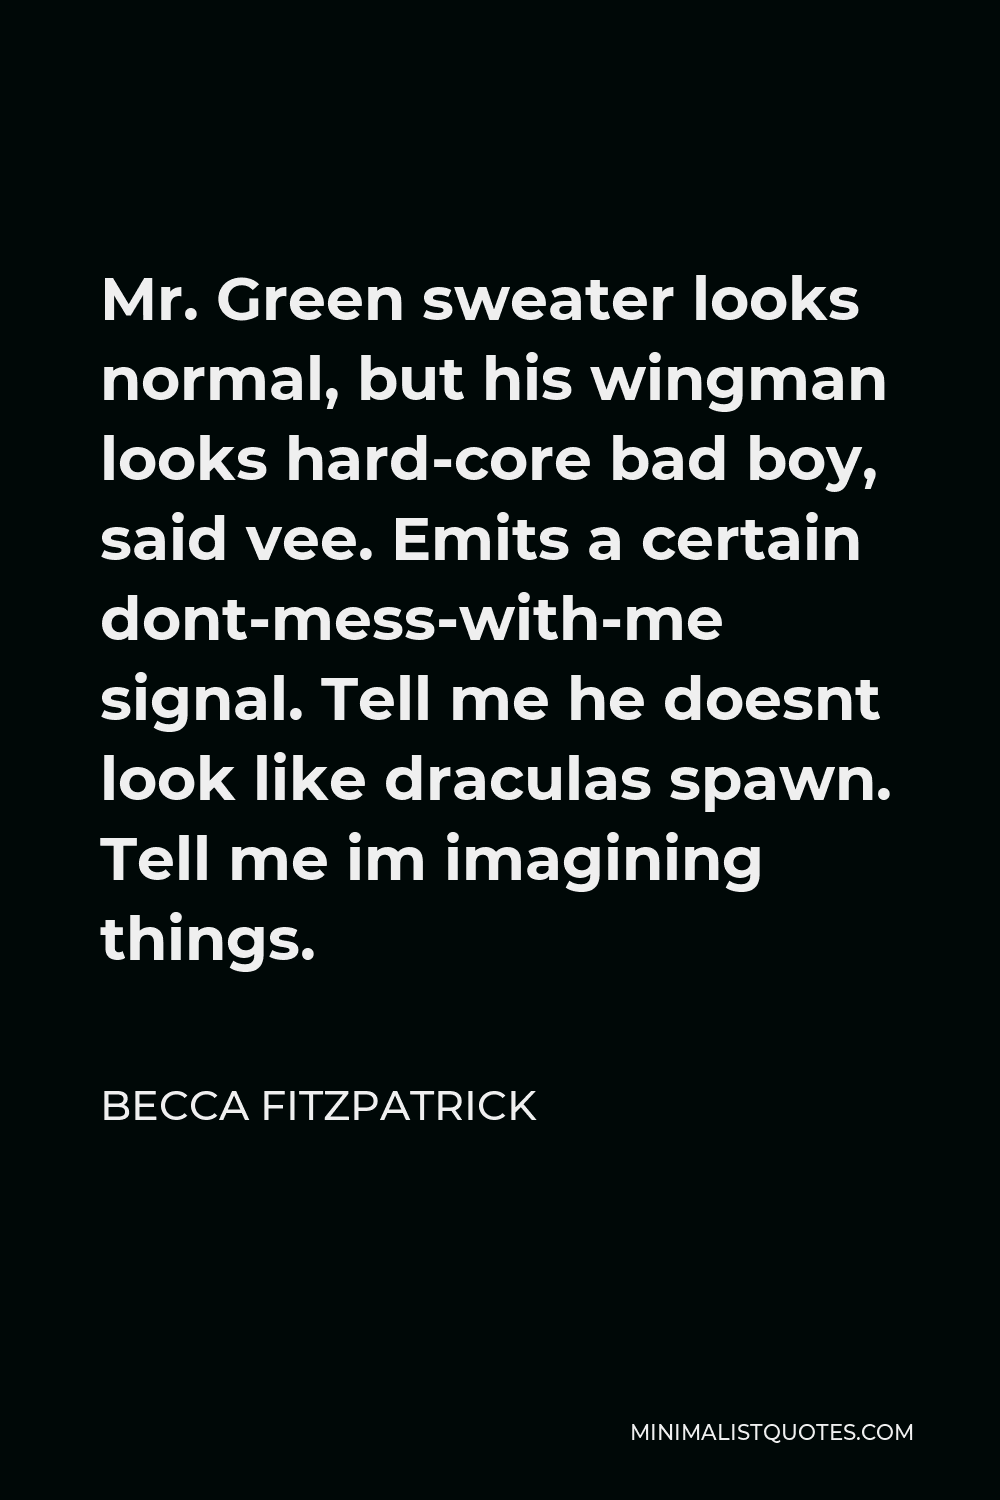 Becca Fitzpatrick Quote - Mr. Green sweater looks normal, but his wingman looks hard-core bad boy, said vee. Emits a certain dont-mess-with-me signal. Tell me he doesnt look like draculas spawn. Tell me im imagining things.